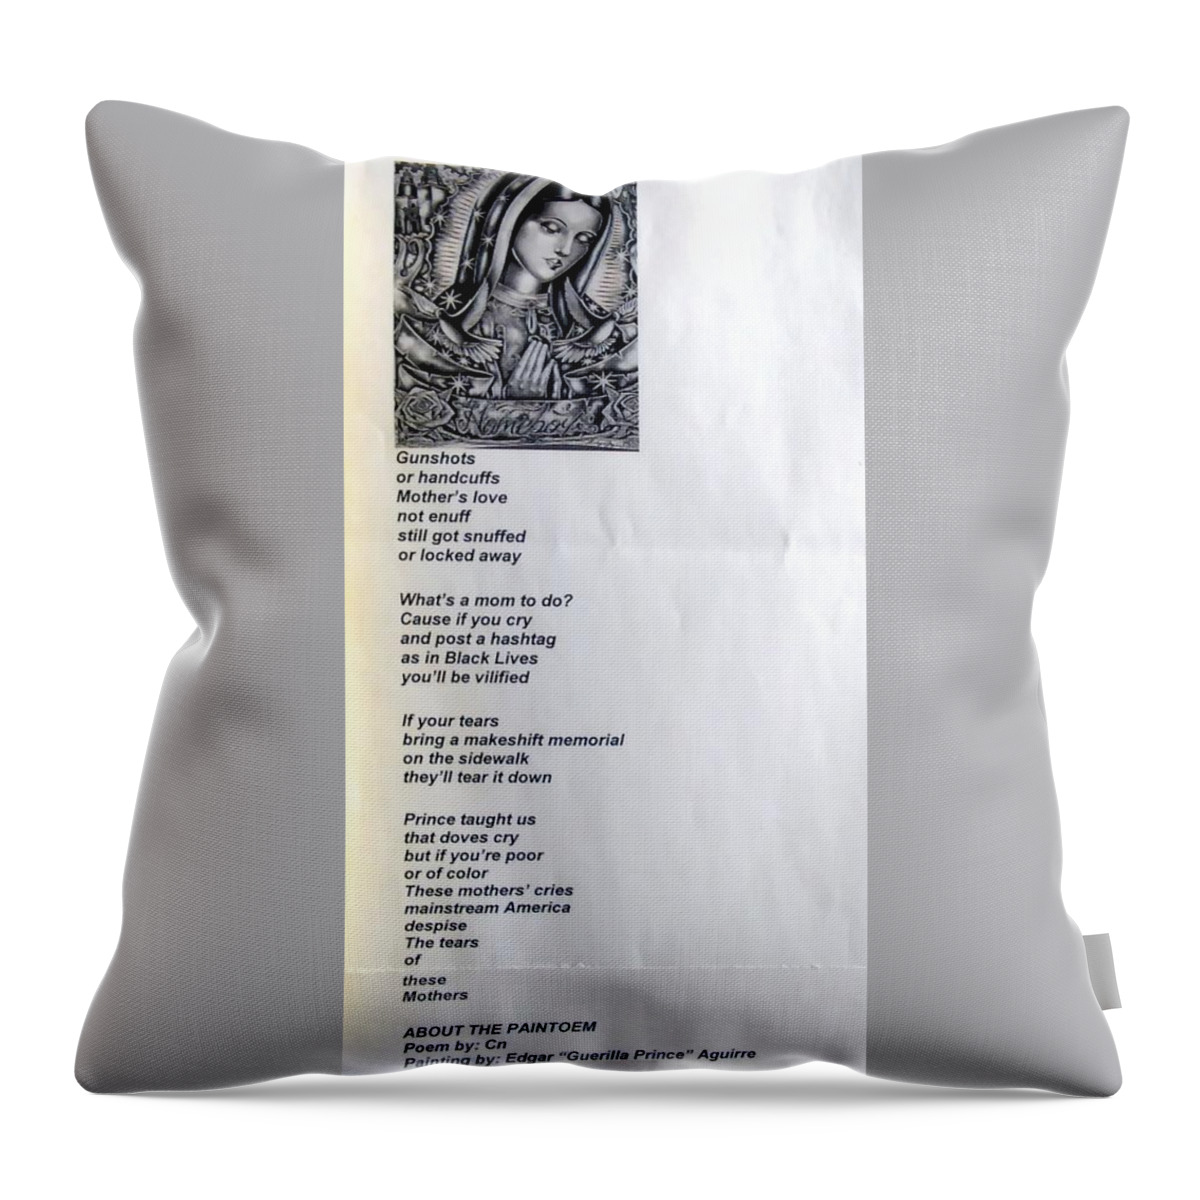 Black Art Throw Pillow featuring the drawing Tears of the Mothers Paintoem by Donald 'C-Note' Hooker and Edgar Aguirre